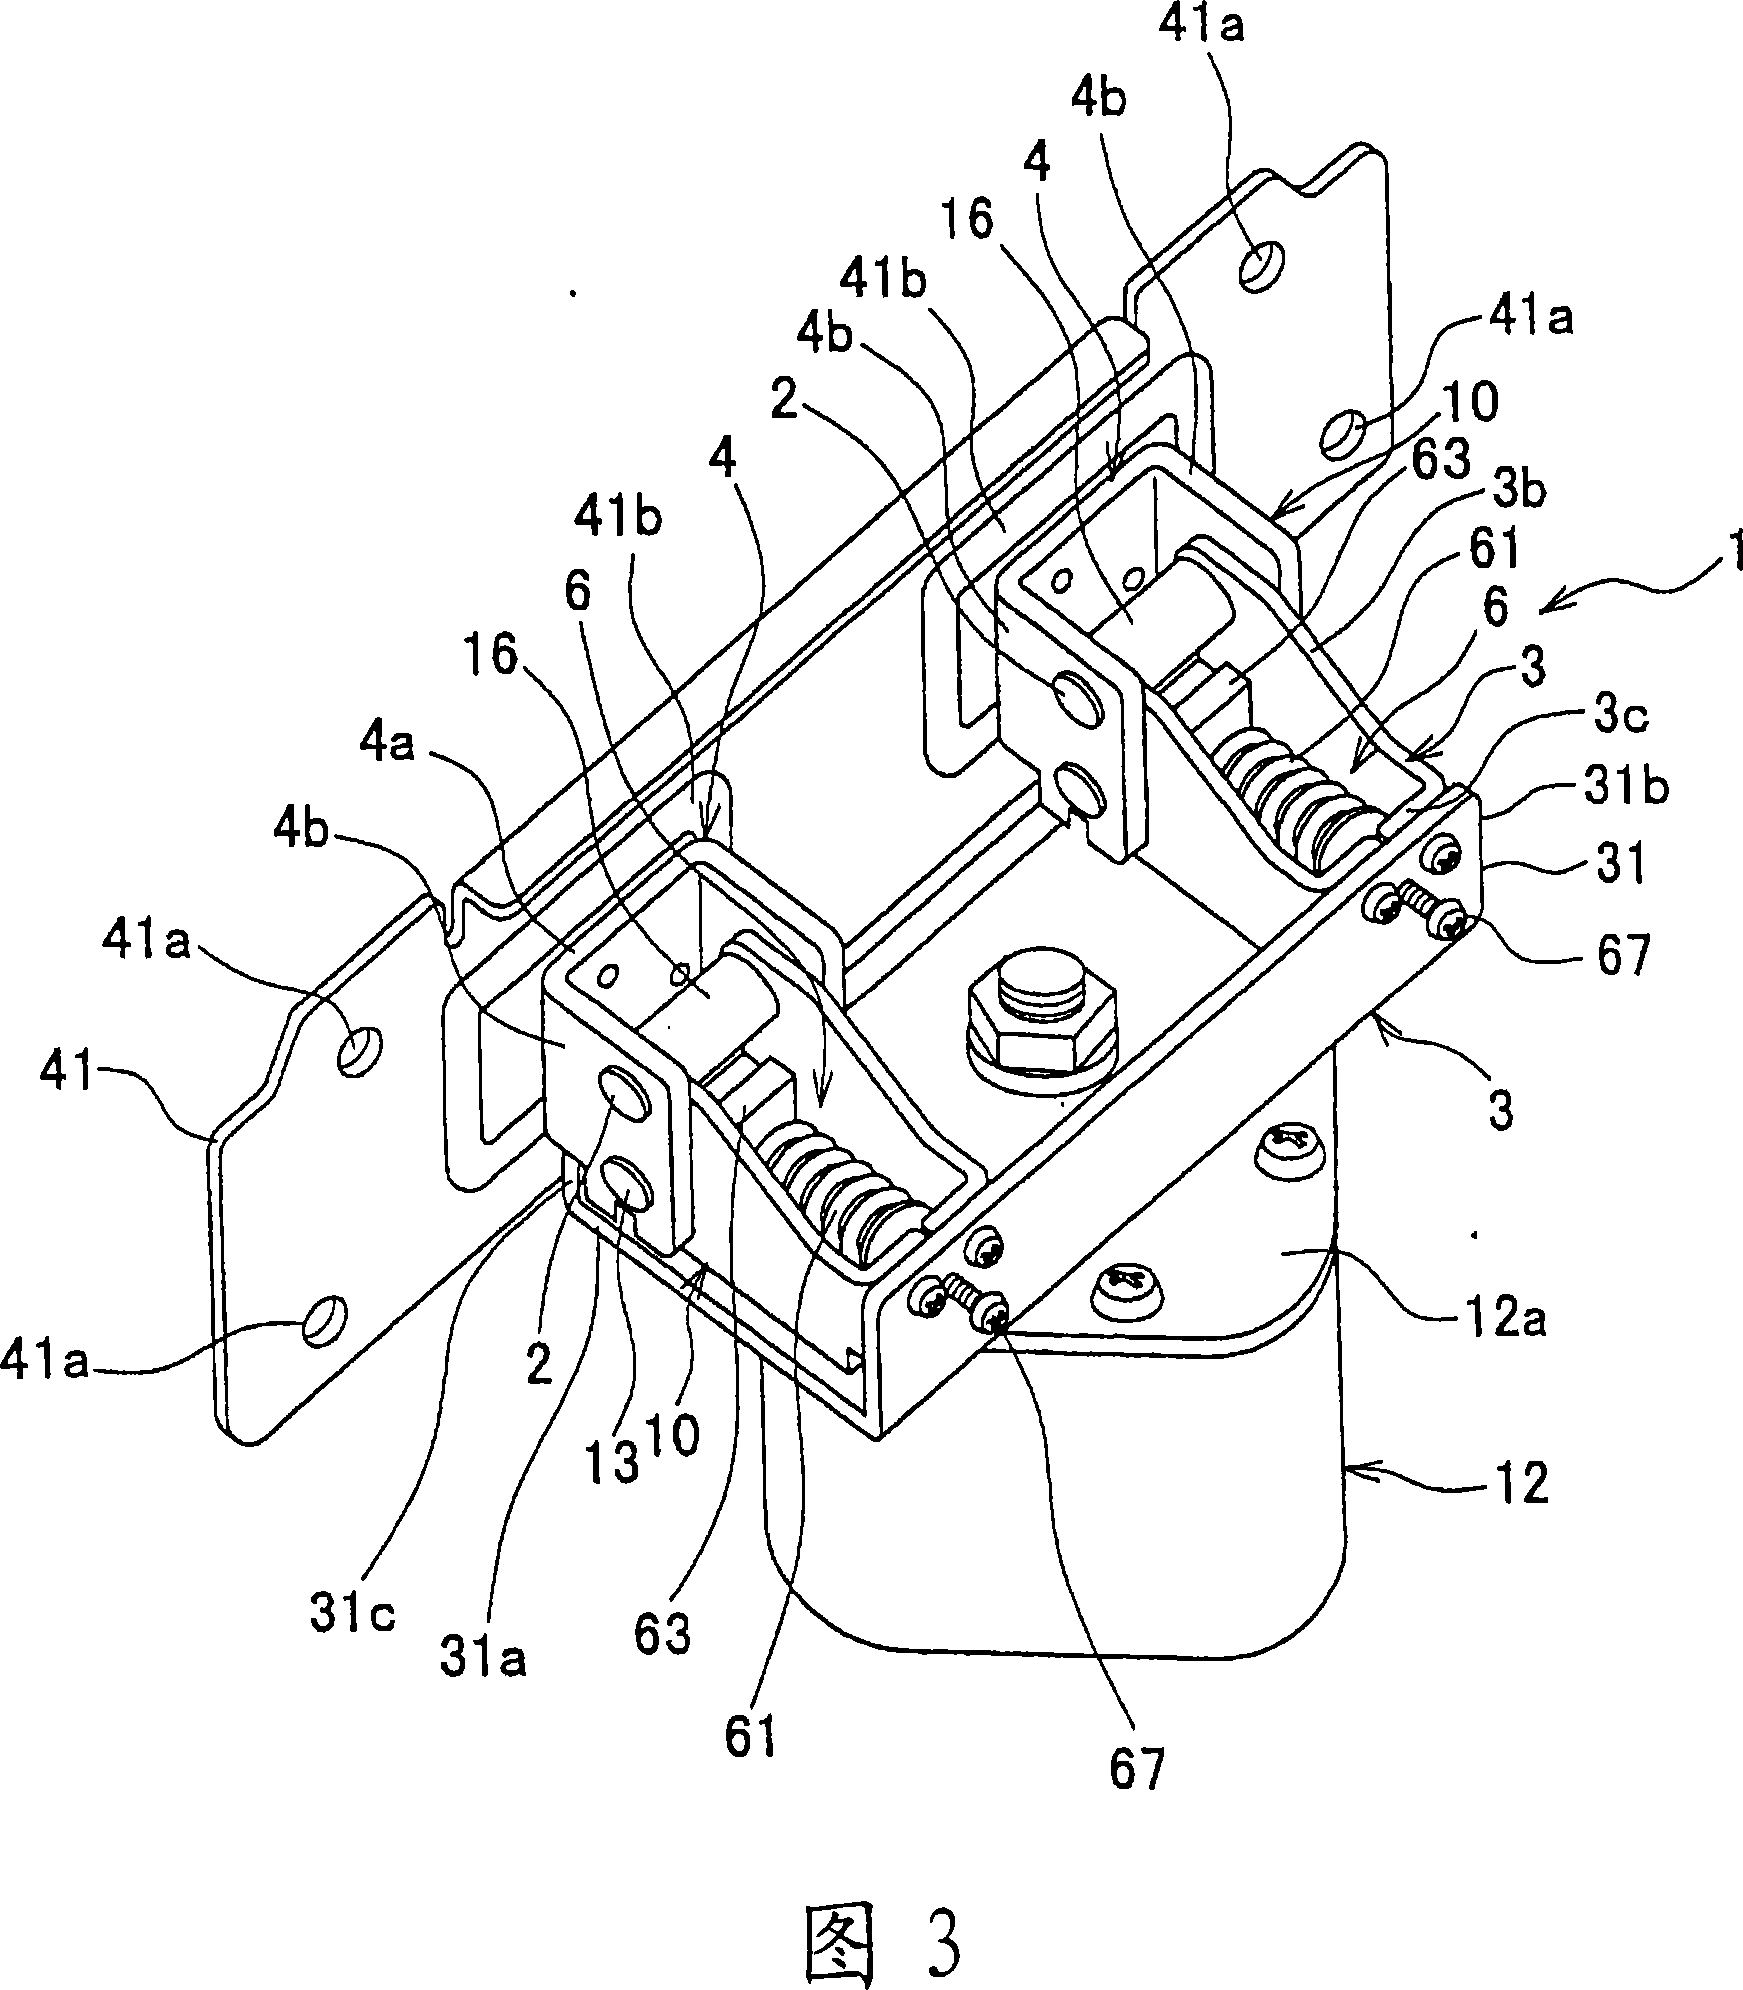 Display supporting mechanism